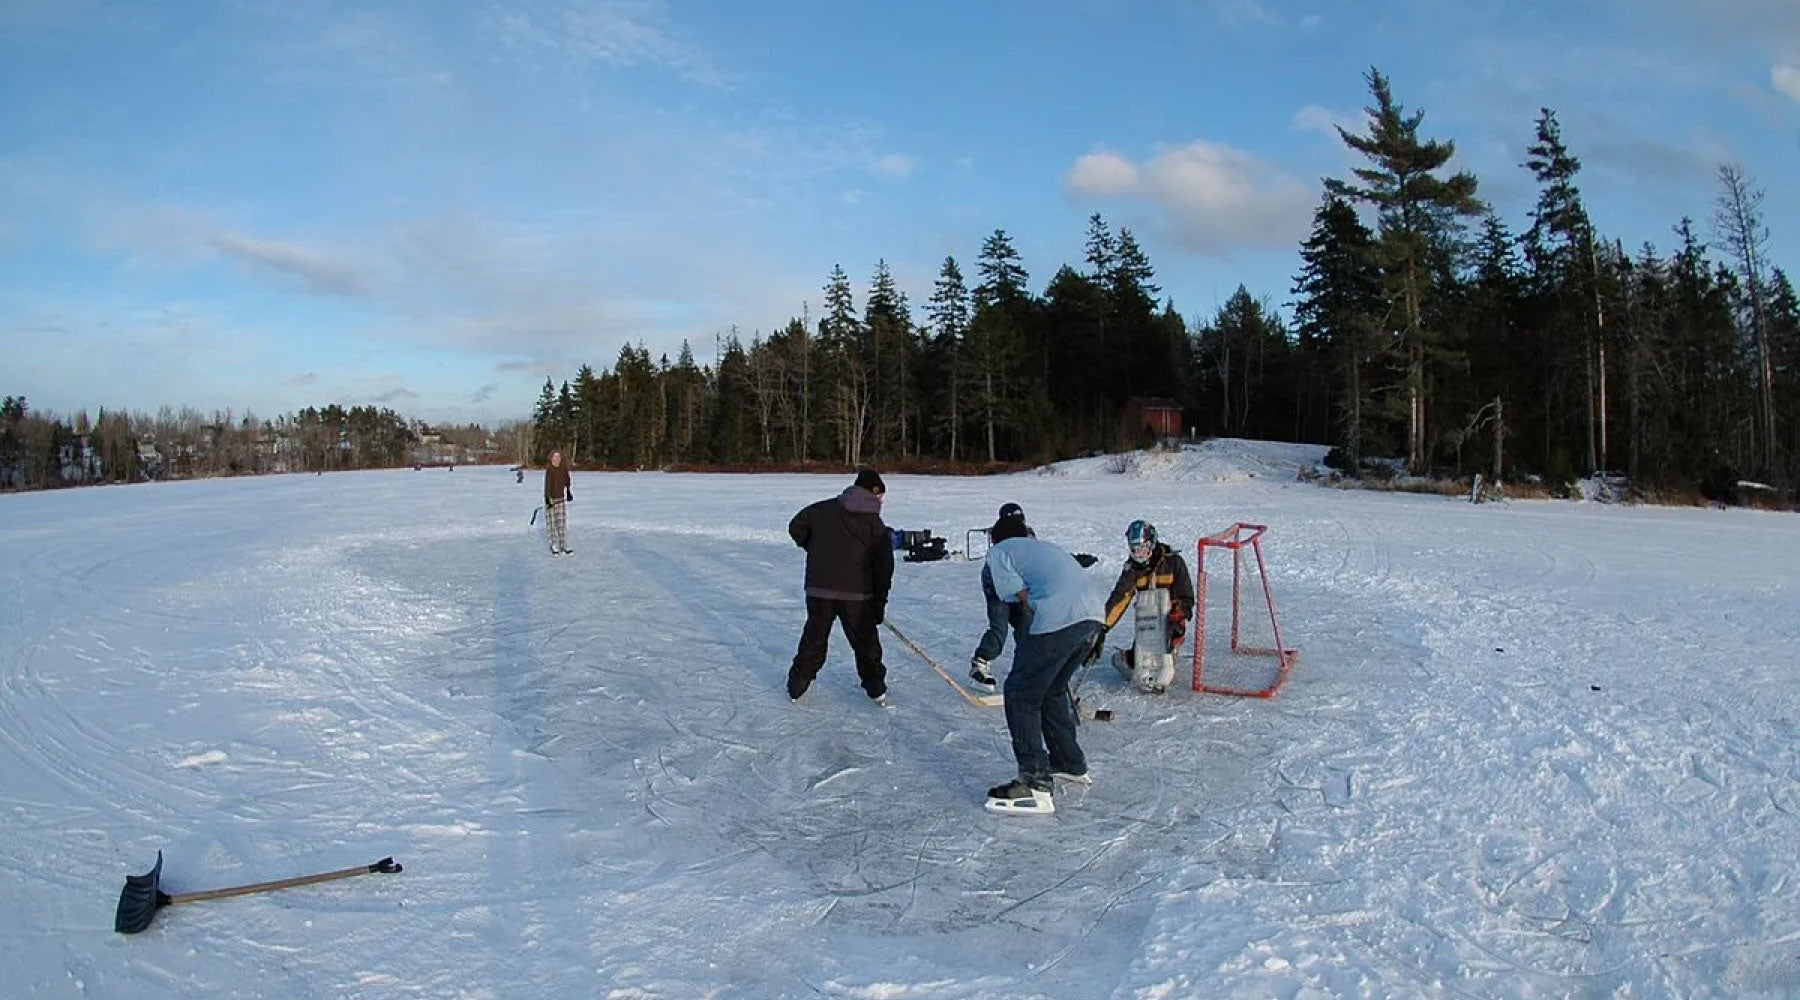 Image from Pond Hockey: The Movie.